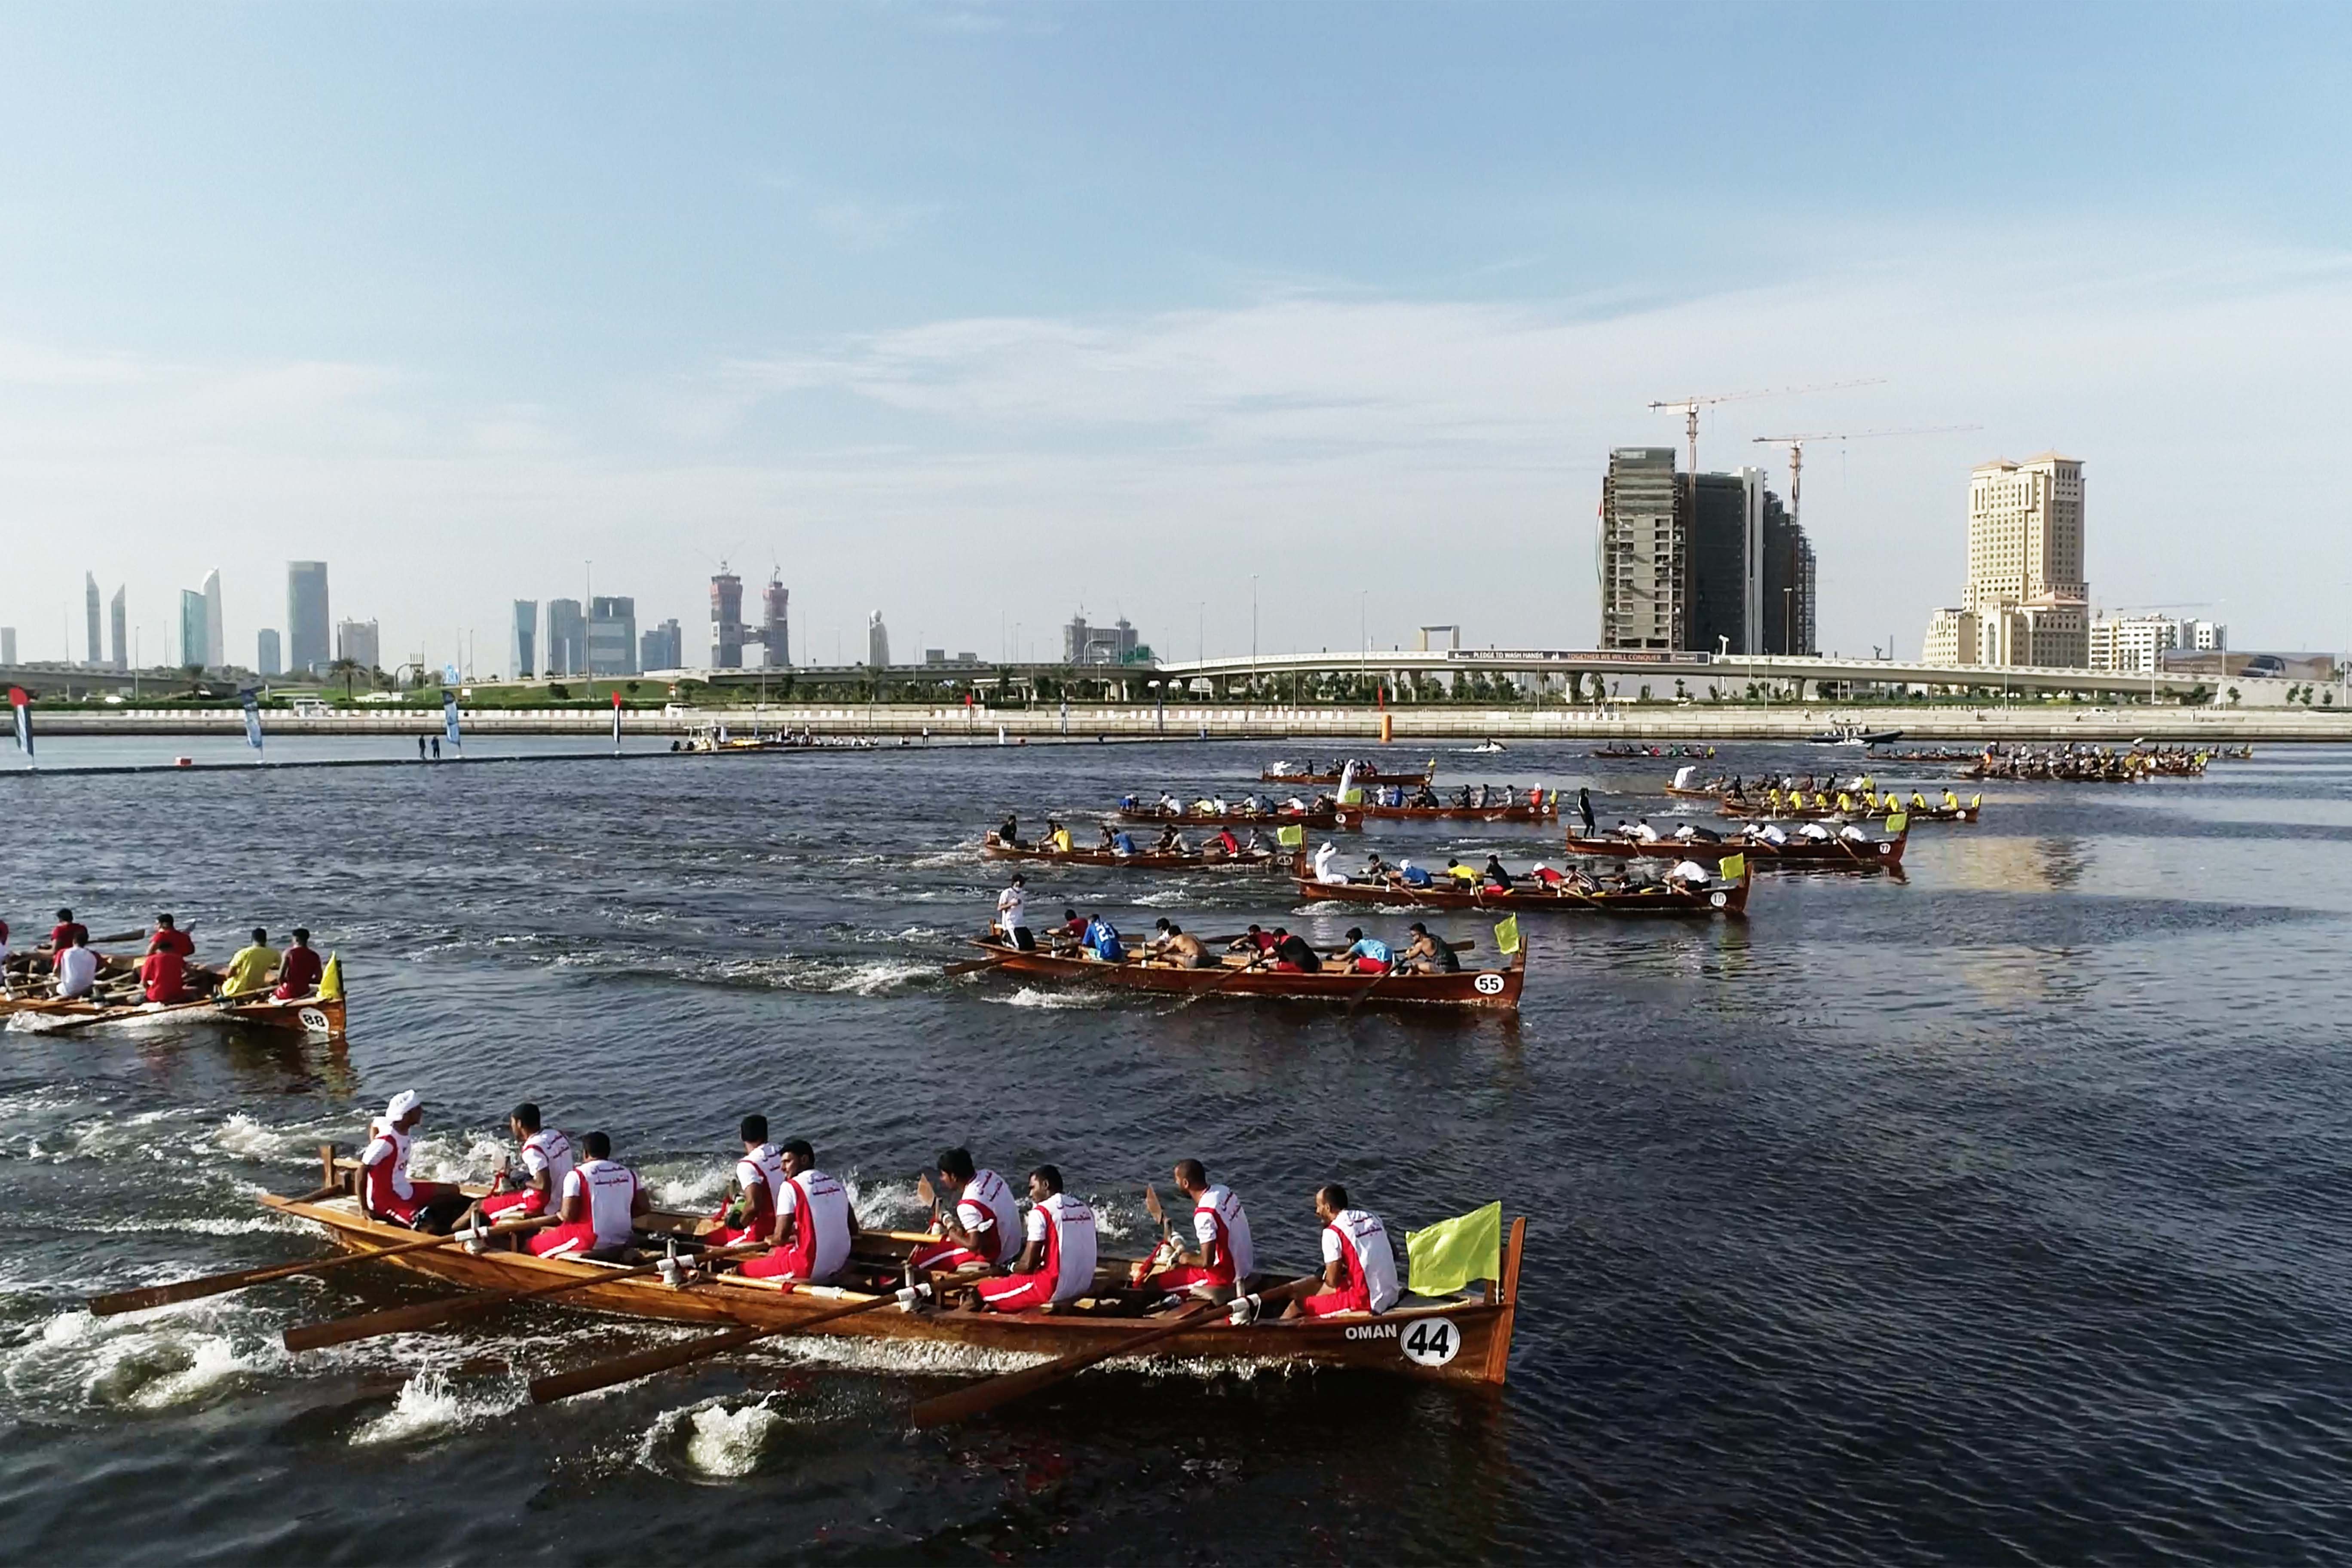 Registration Closes today for the Second Round of Traditional Rowing Race